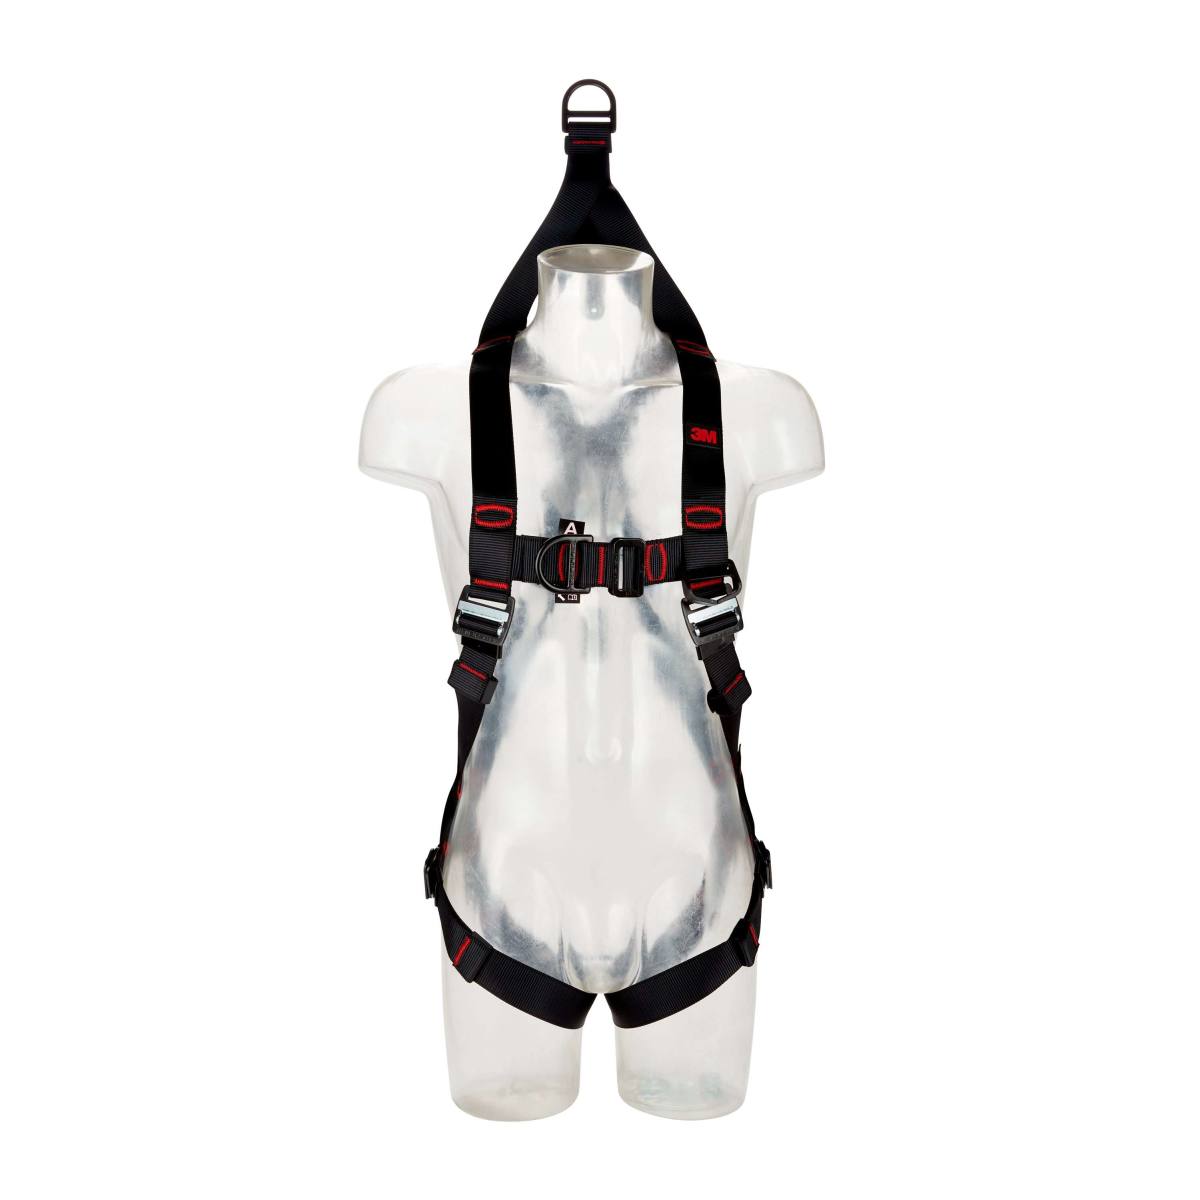 3M PROTECTA Full body harness - chest and back fall arrest eyelets, rescue loop, fall indicators on the chest and back, belt end depot, label protection with labelling field, black coated fittings, lanyard holder, M/L